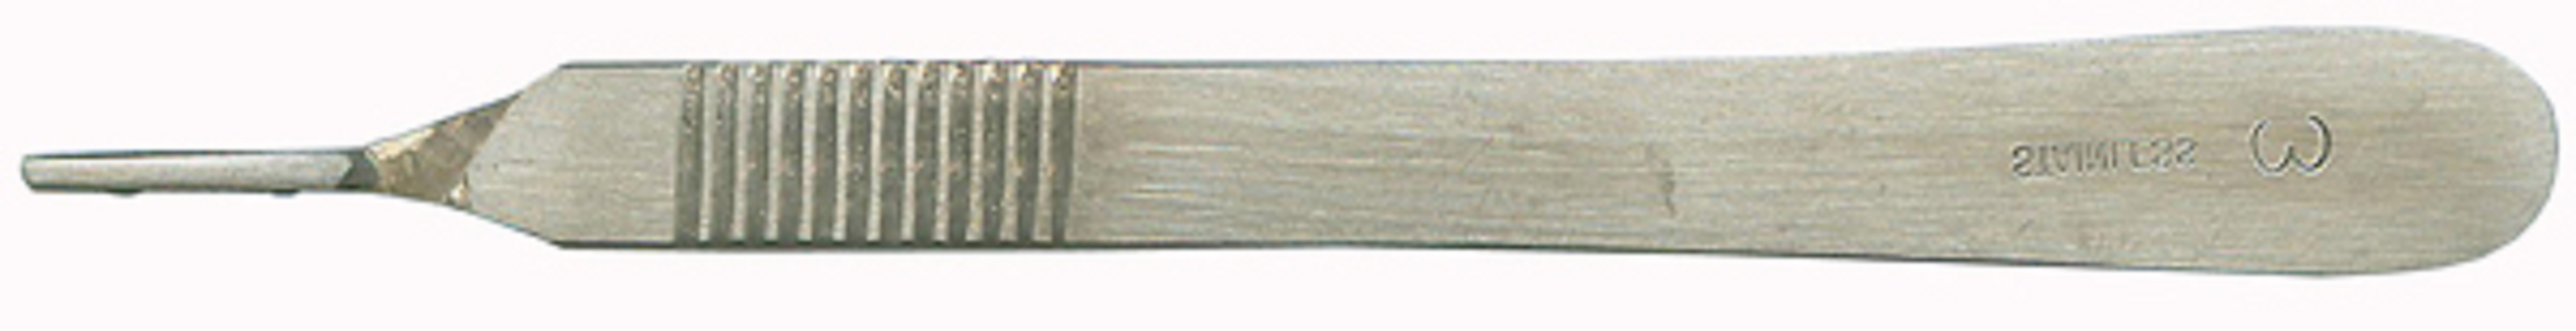 STAINLESS Scalpel Handle No 3 for blades 10 : 10a : 11 : 12 : 15 : 15a - Click Image to Close